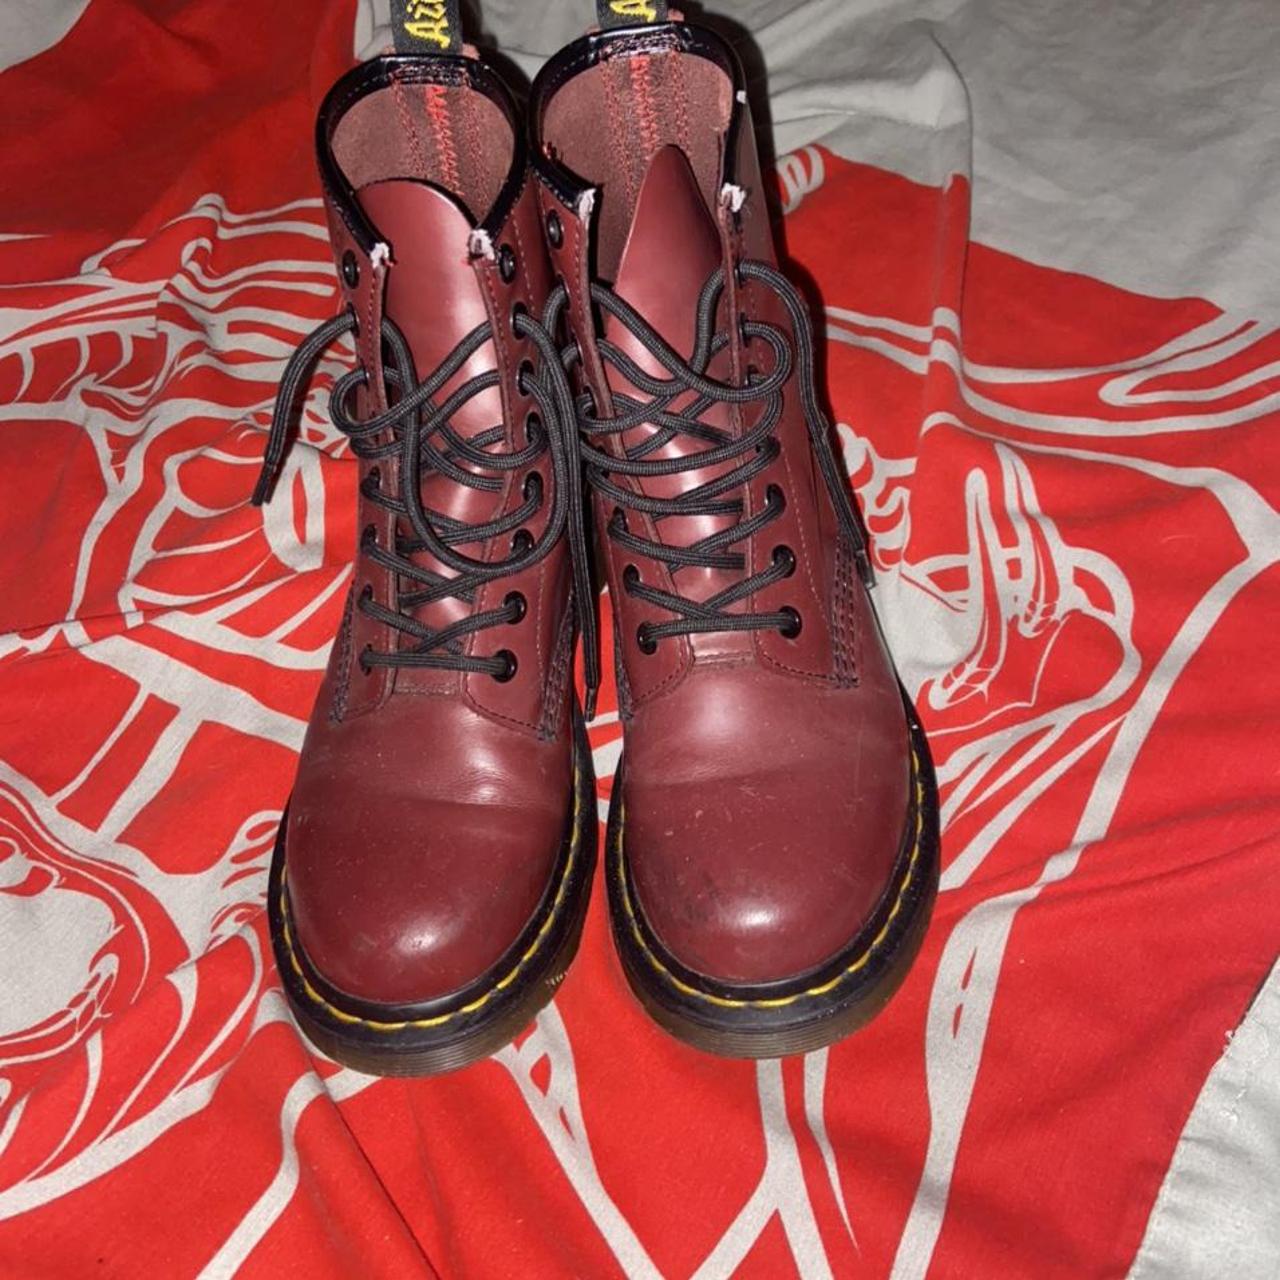 Product Image 1 - Maroon doc martens highs 
Size